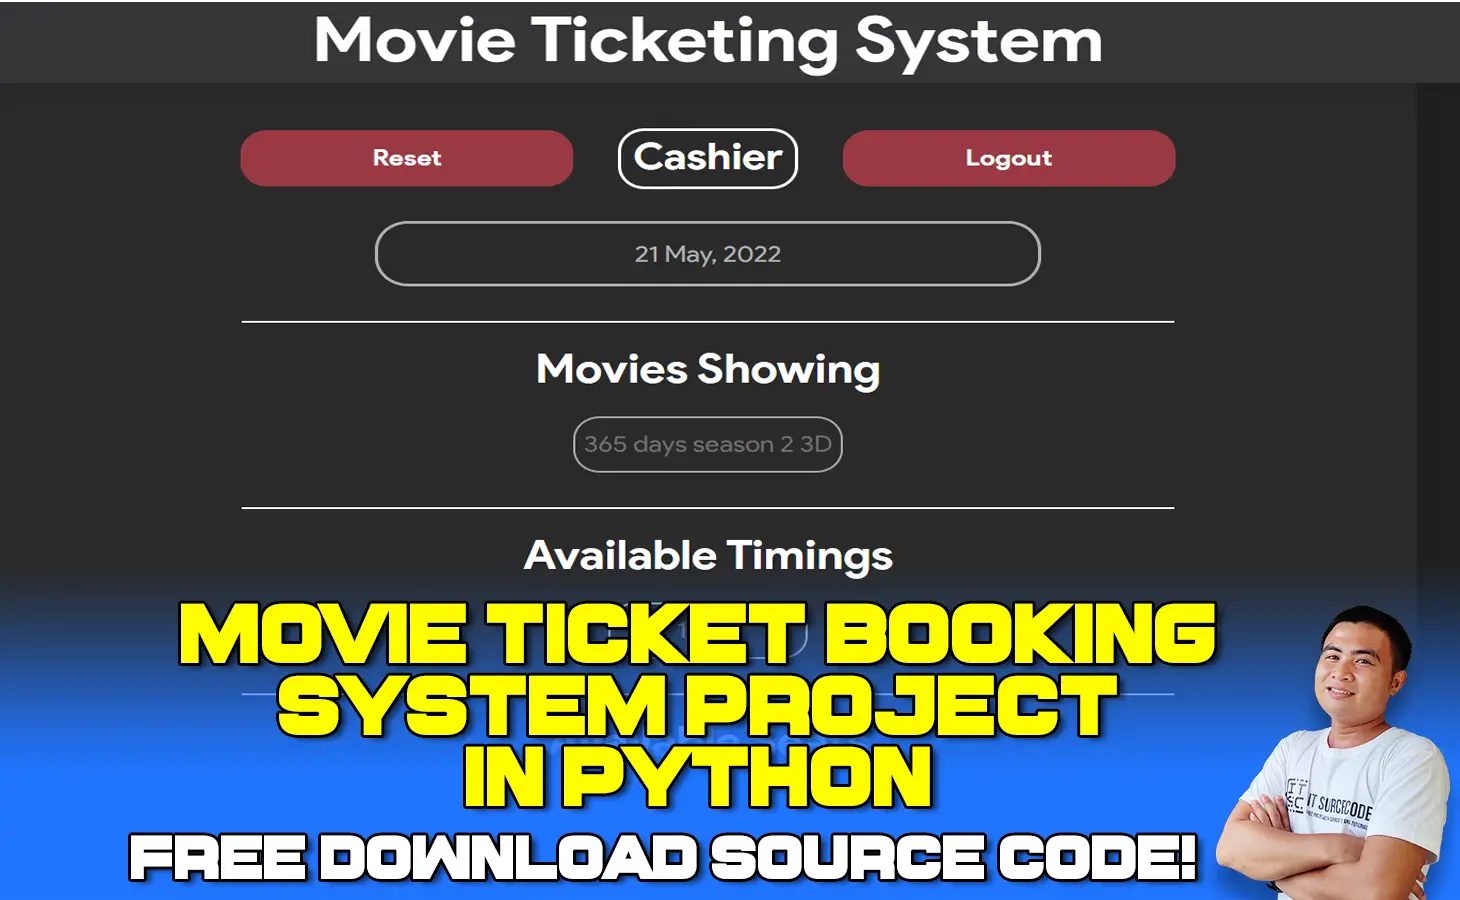 Movie Ticket Booking System Project in Python with Source Code